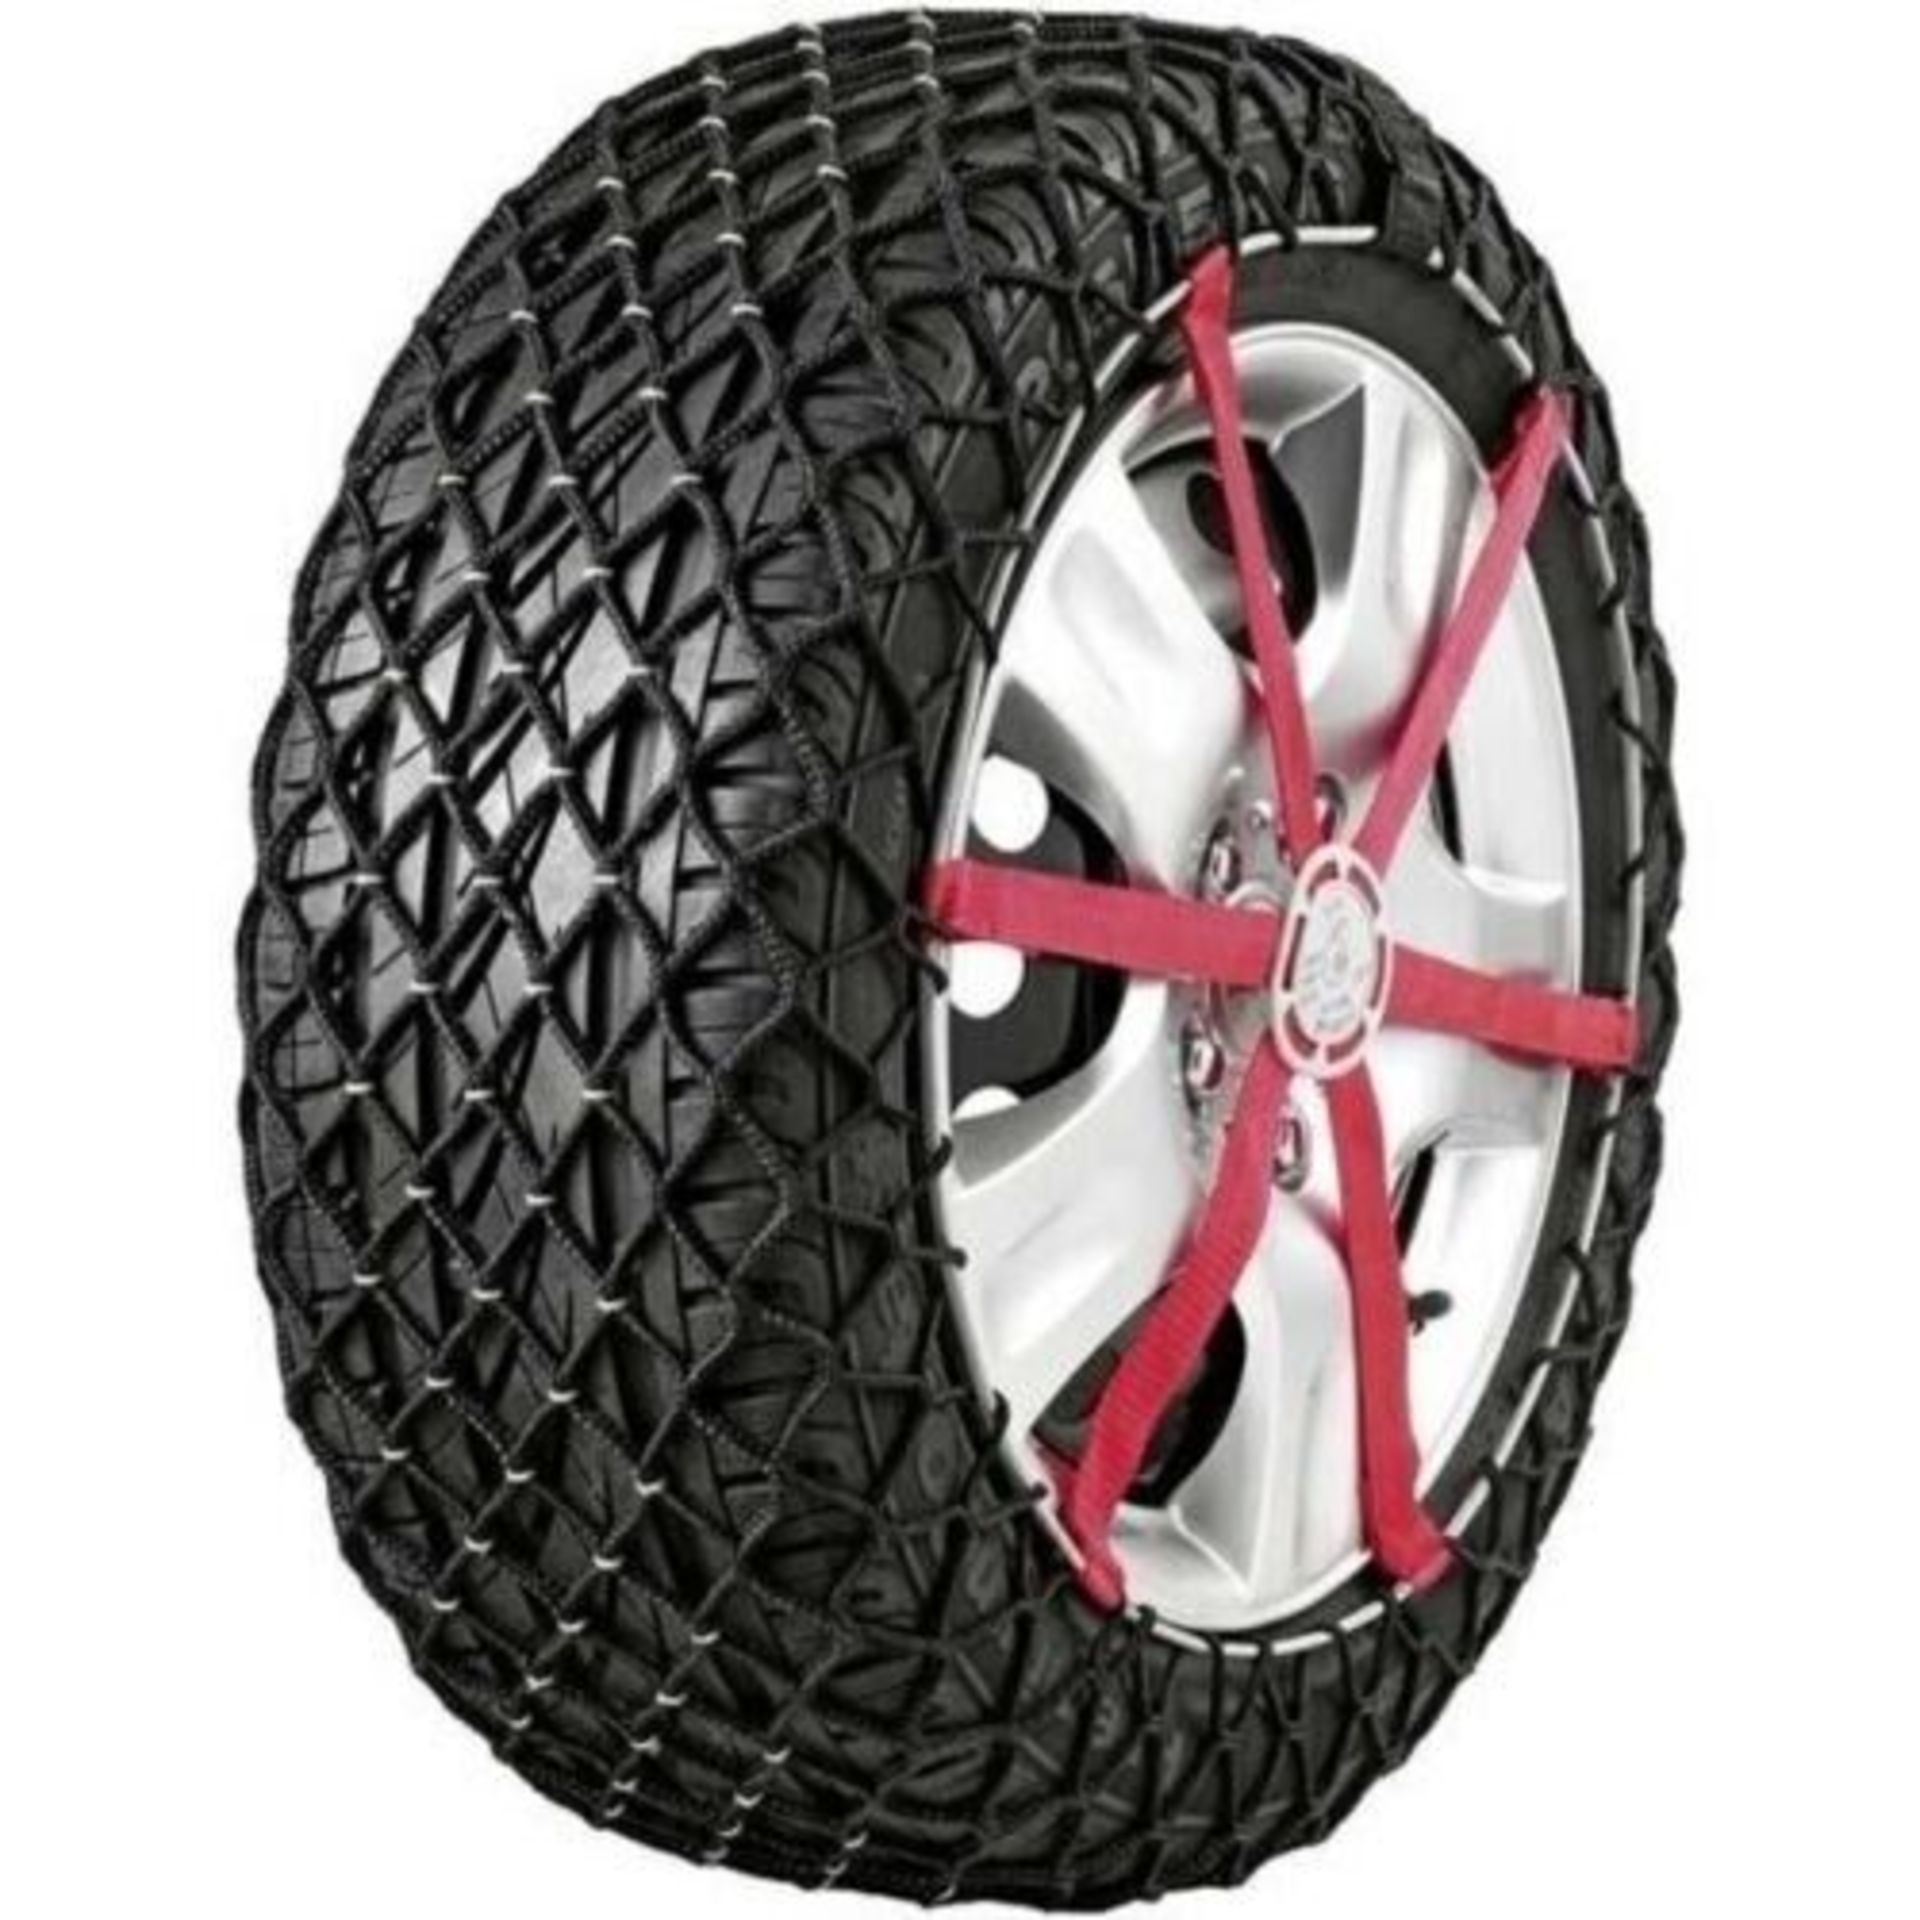 10 X MICHELIN 2 EASY GRIP COMPOSITE SNOW CHAINS G13 7900 165/70/14 185/60/14 TYRES - RRP £350 - Image 2 of 3